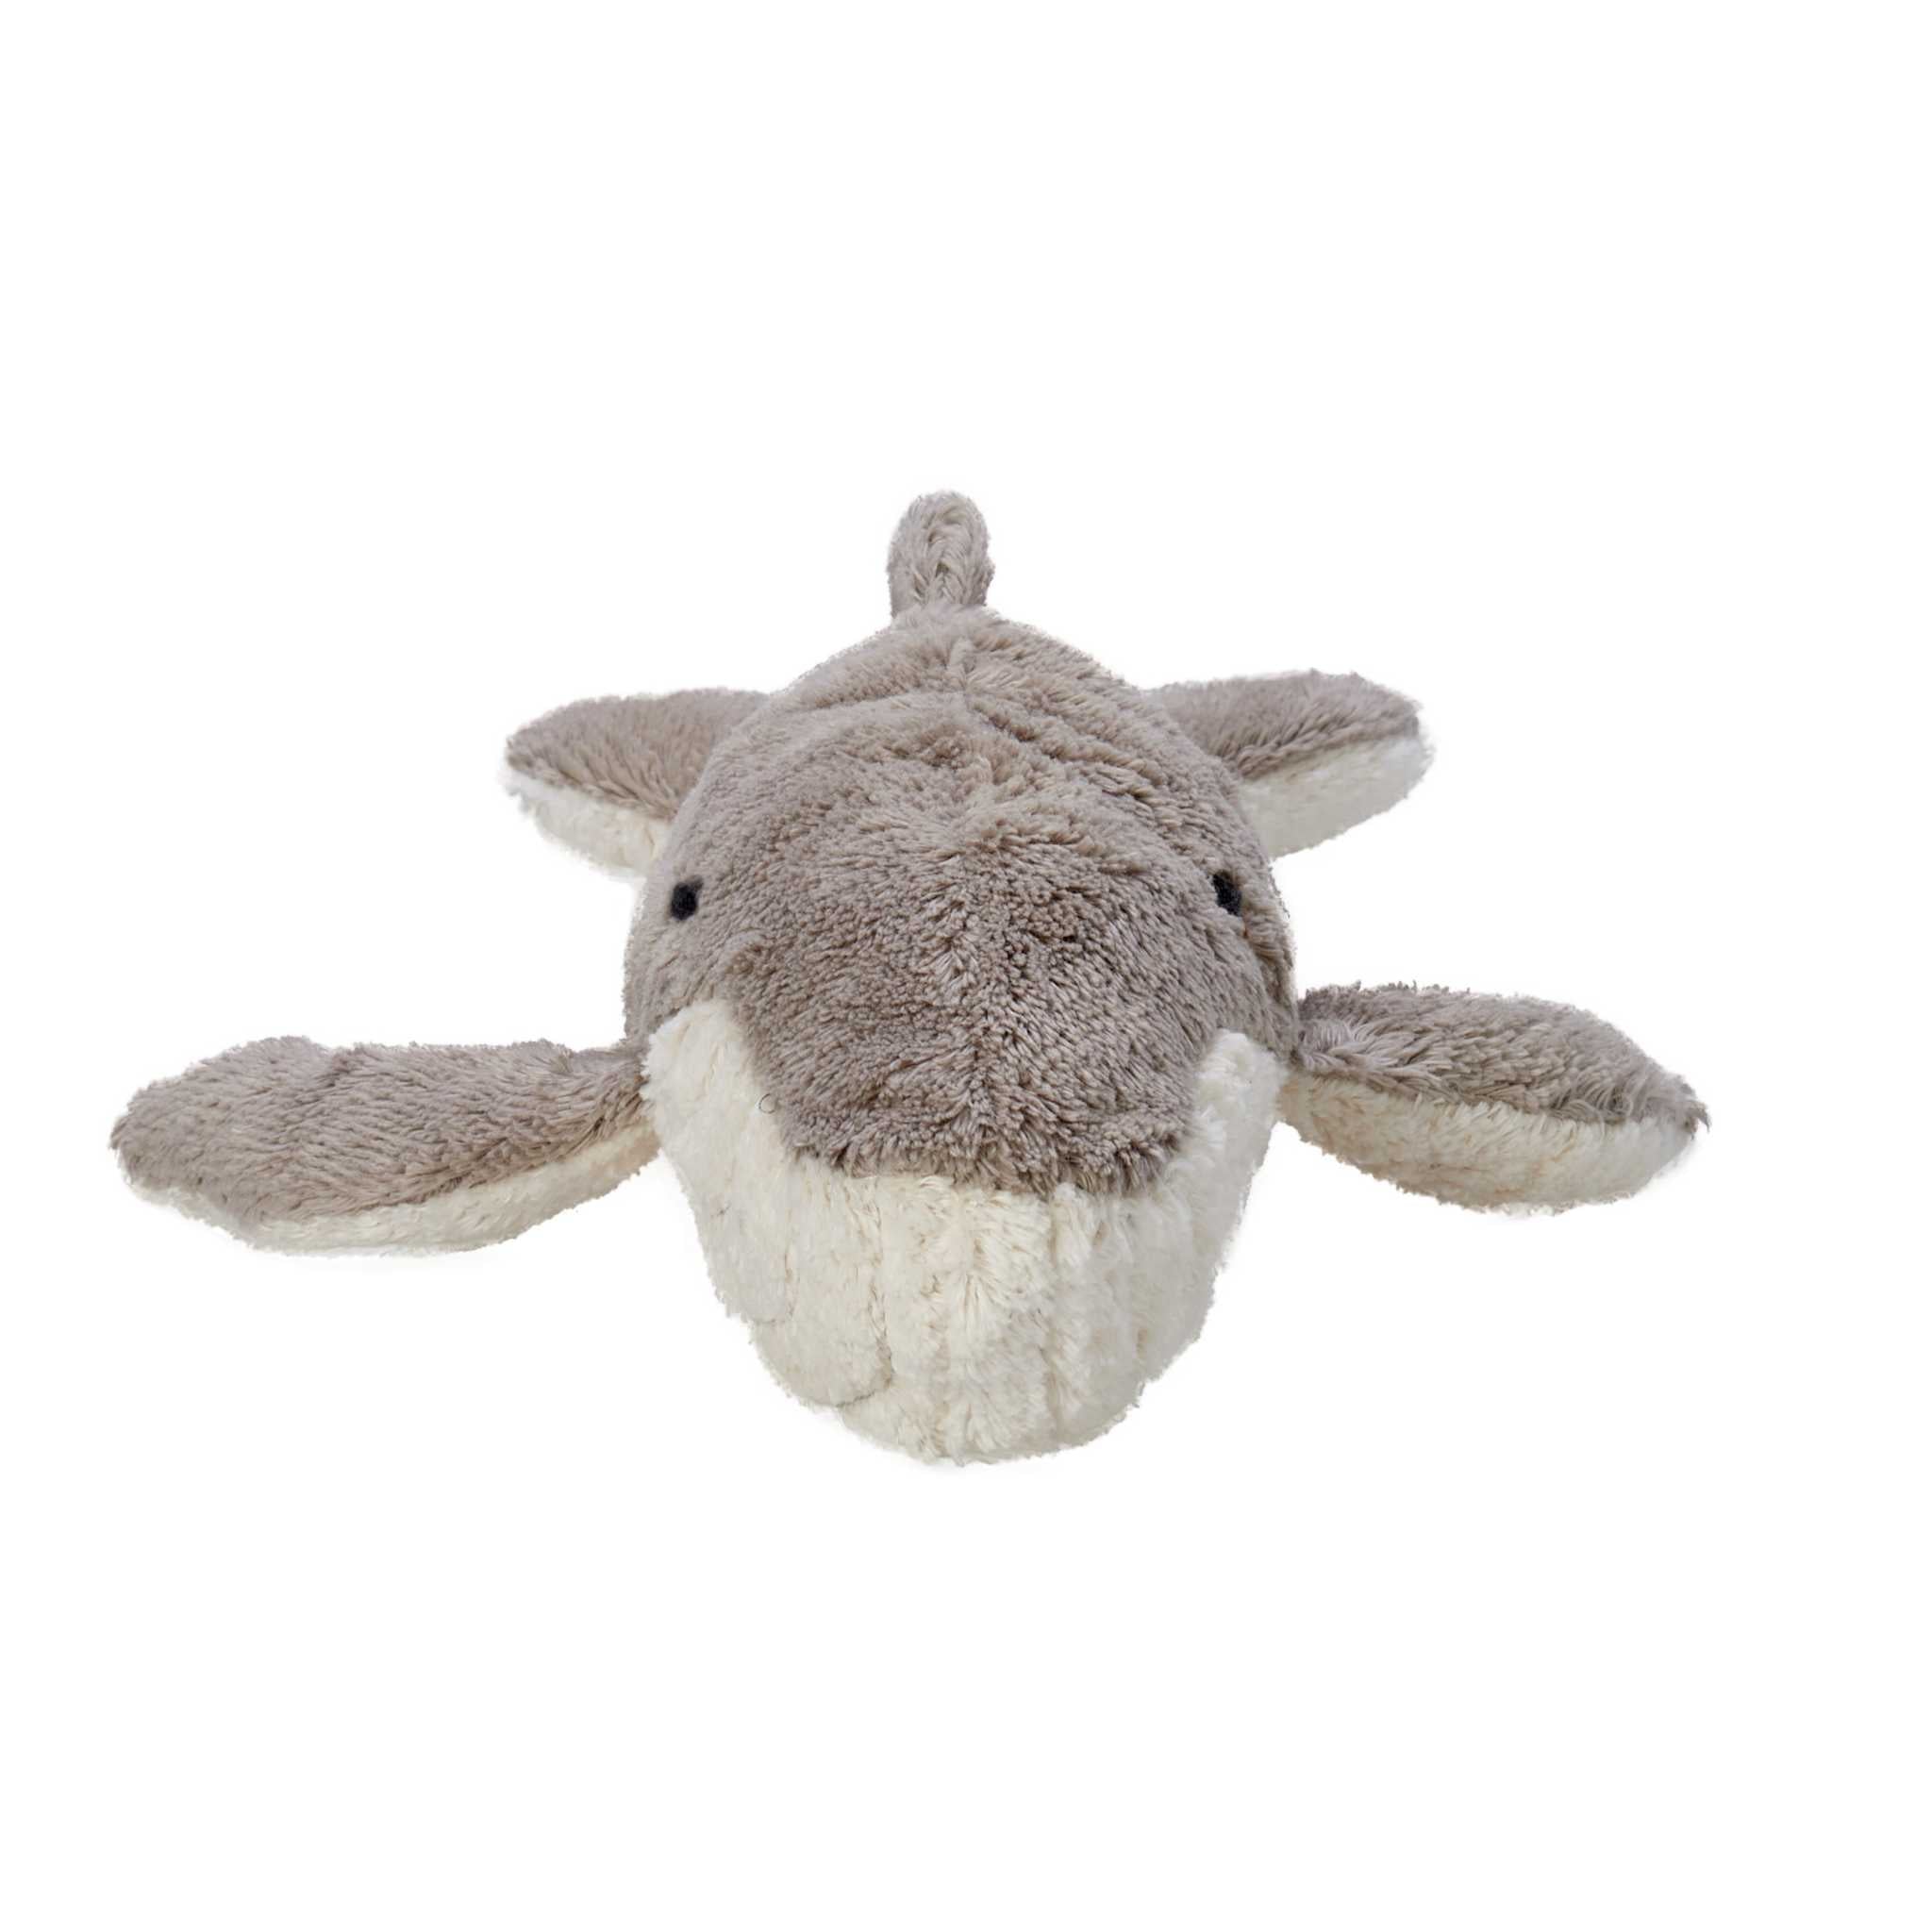 Senger Naturwelt Cuddly Animal Whale Hot Water Bottle Front View On White Background